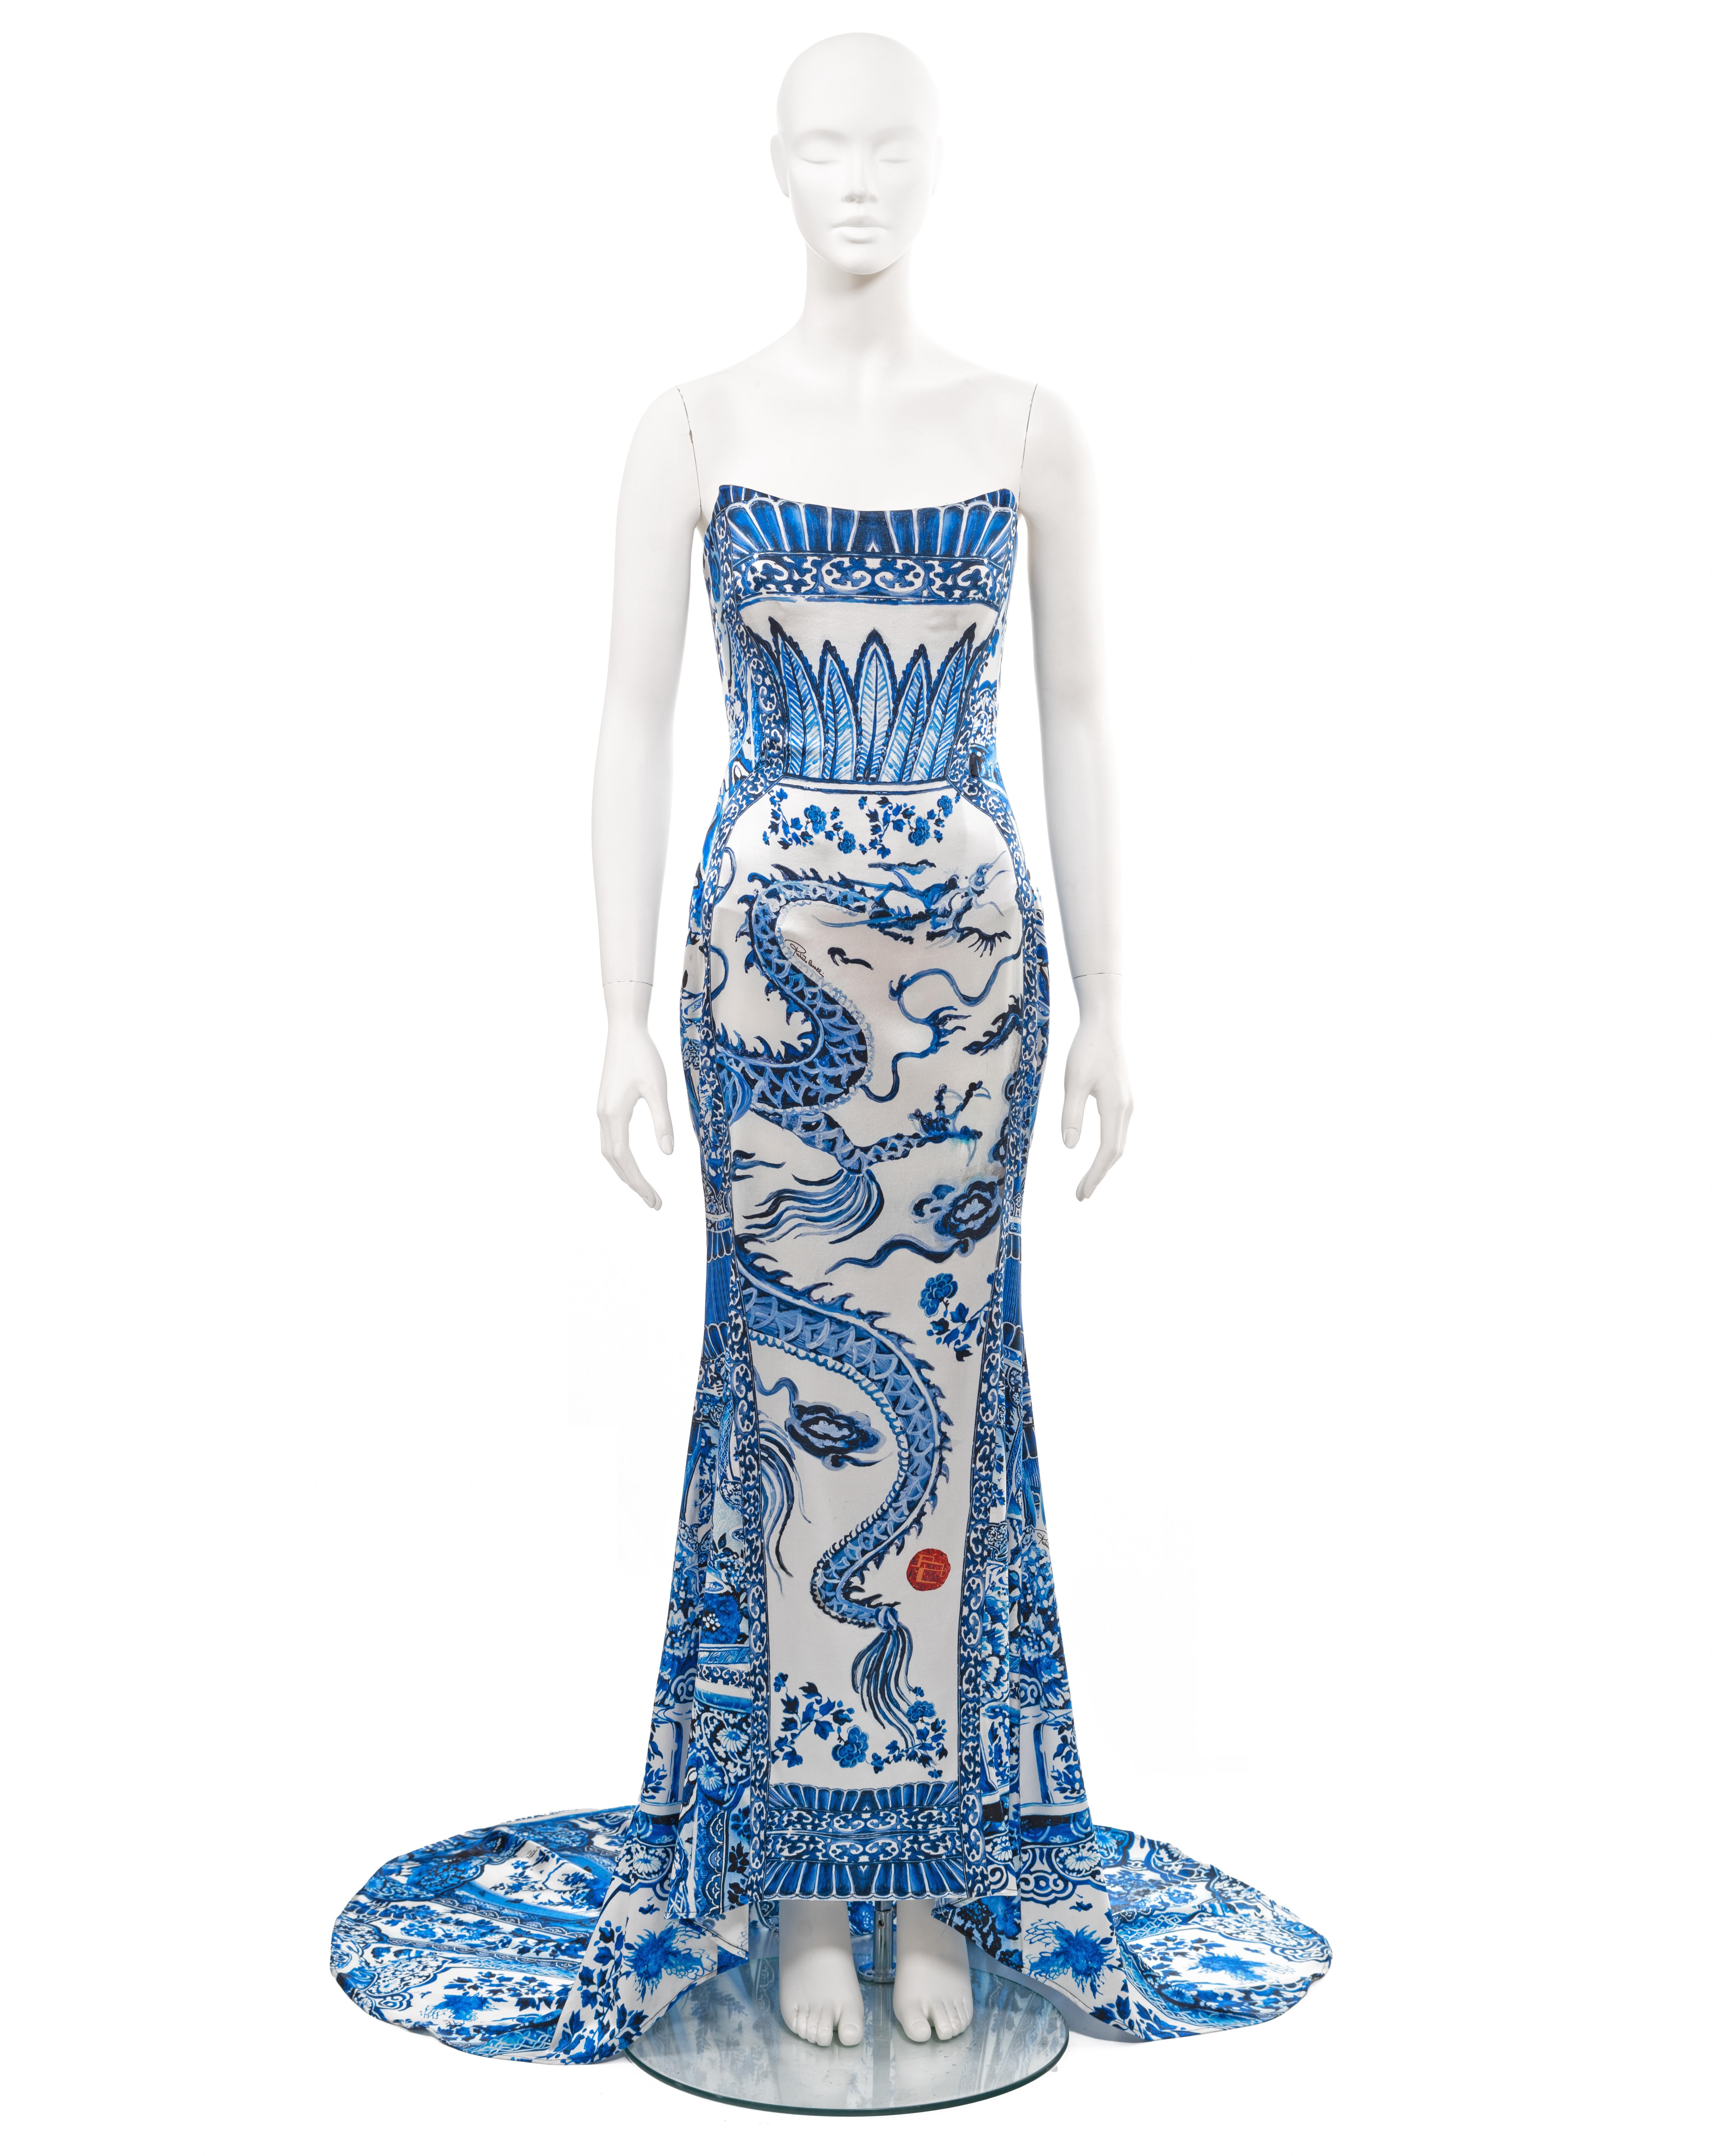 ▪ Roberto Cavalli blue and white printed silk evening dress
▪ Sold by One of a Kind Archive
▪ Fall-Winter 2005
▪ Museum Grade
▪ Constructed from silk with Ming porcelain inspired print of coiling dragons in pursuit of a red flaming pearl
▪ Strapless